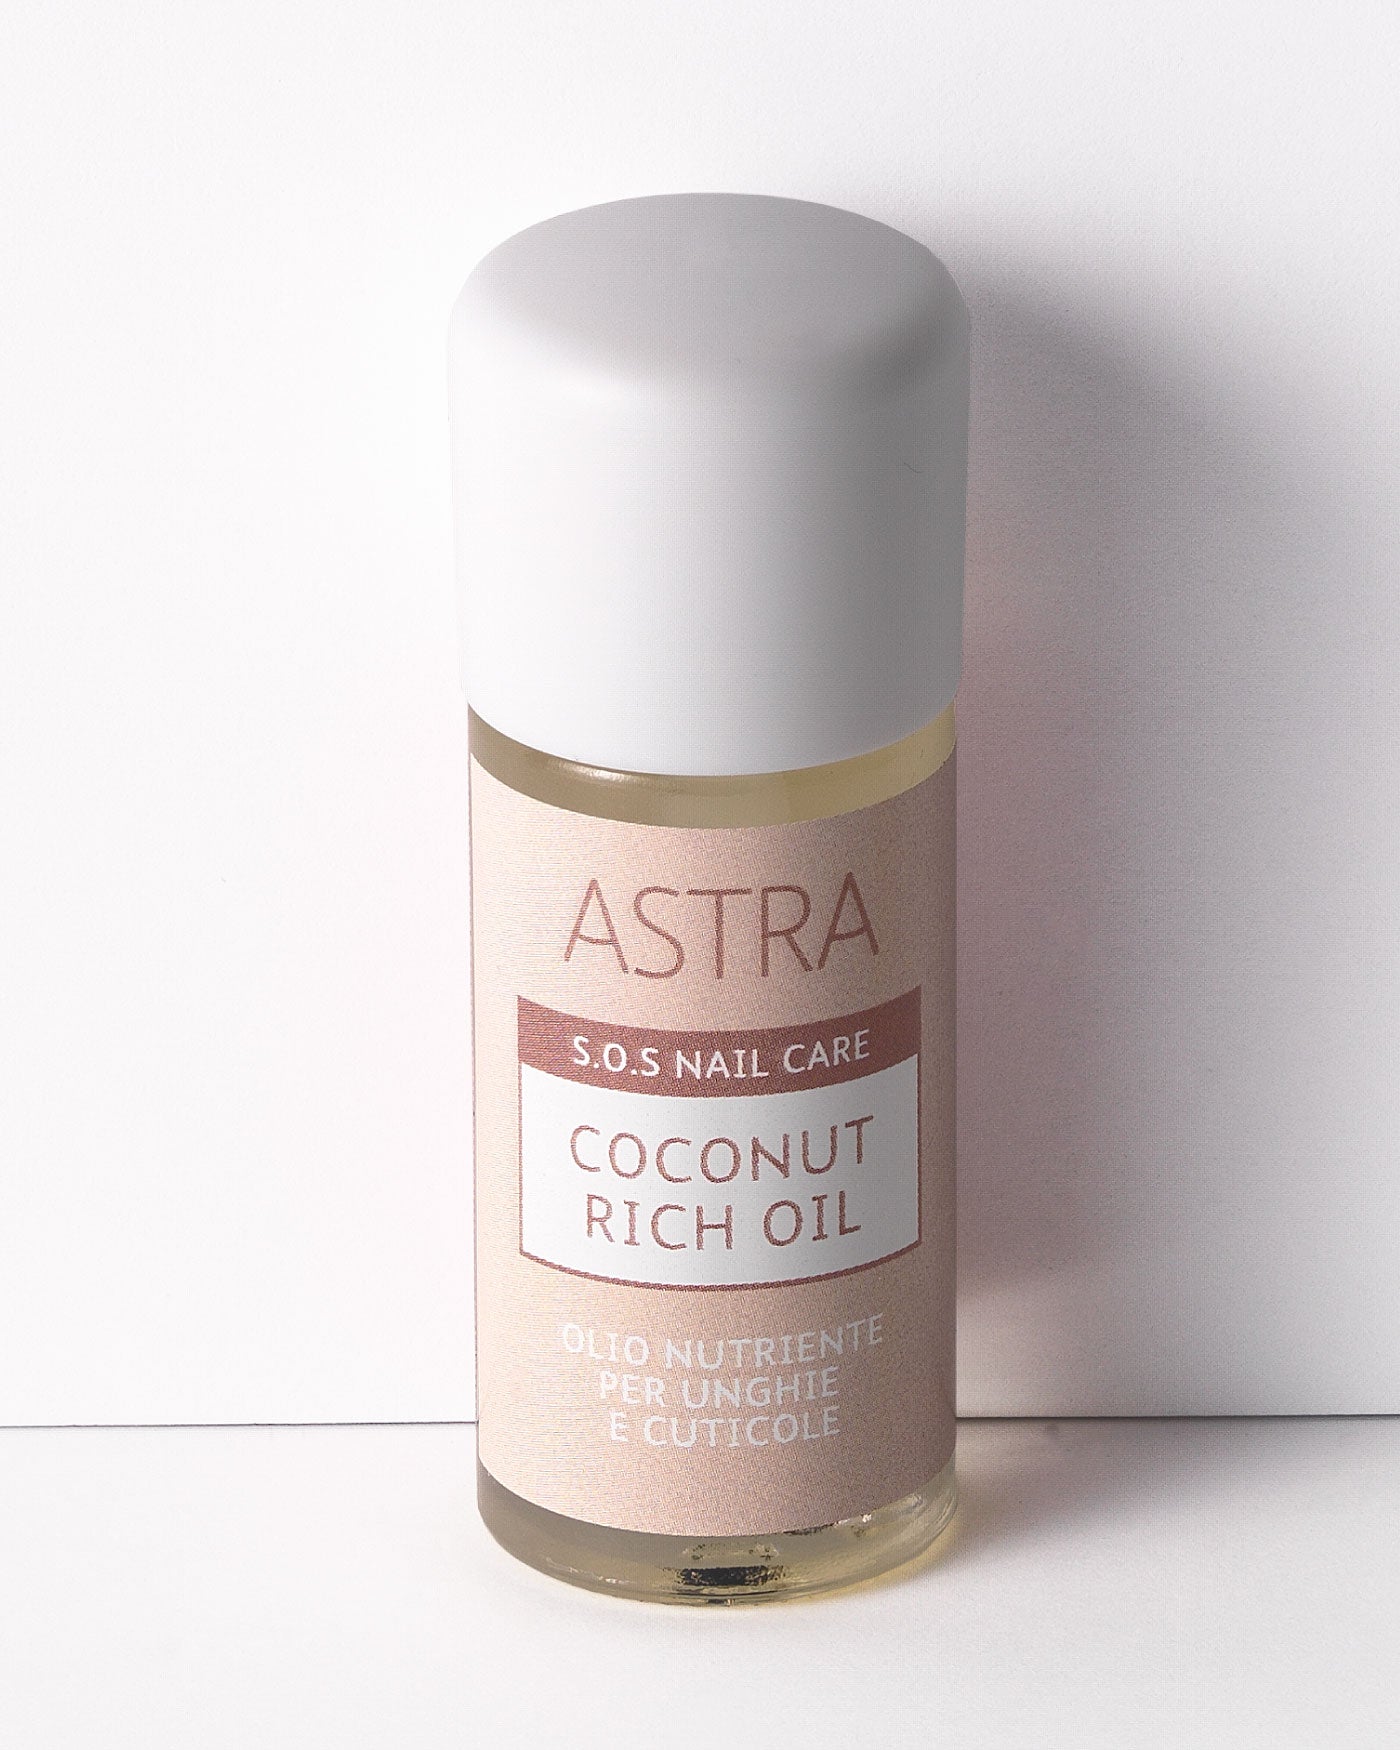 S.O.S NAIL CARE - COCONUT RICH OIL - All Products - Astra Make-Up